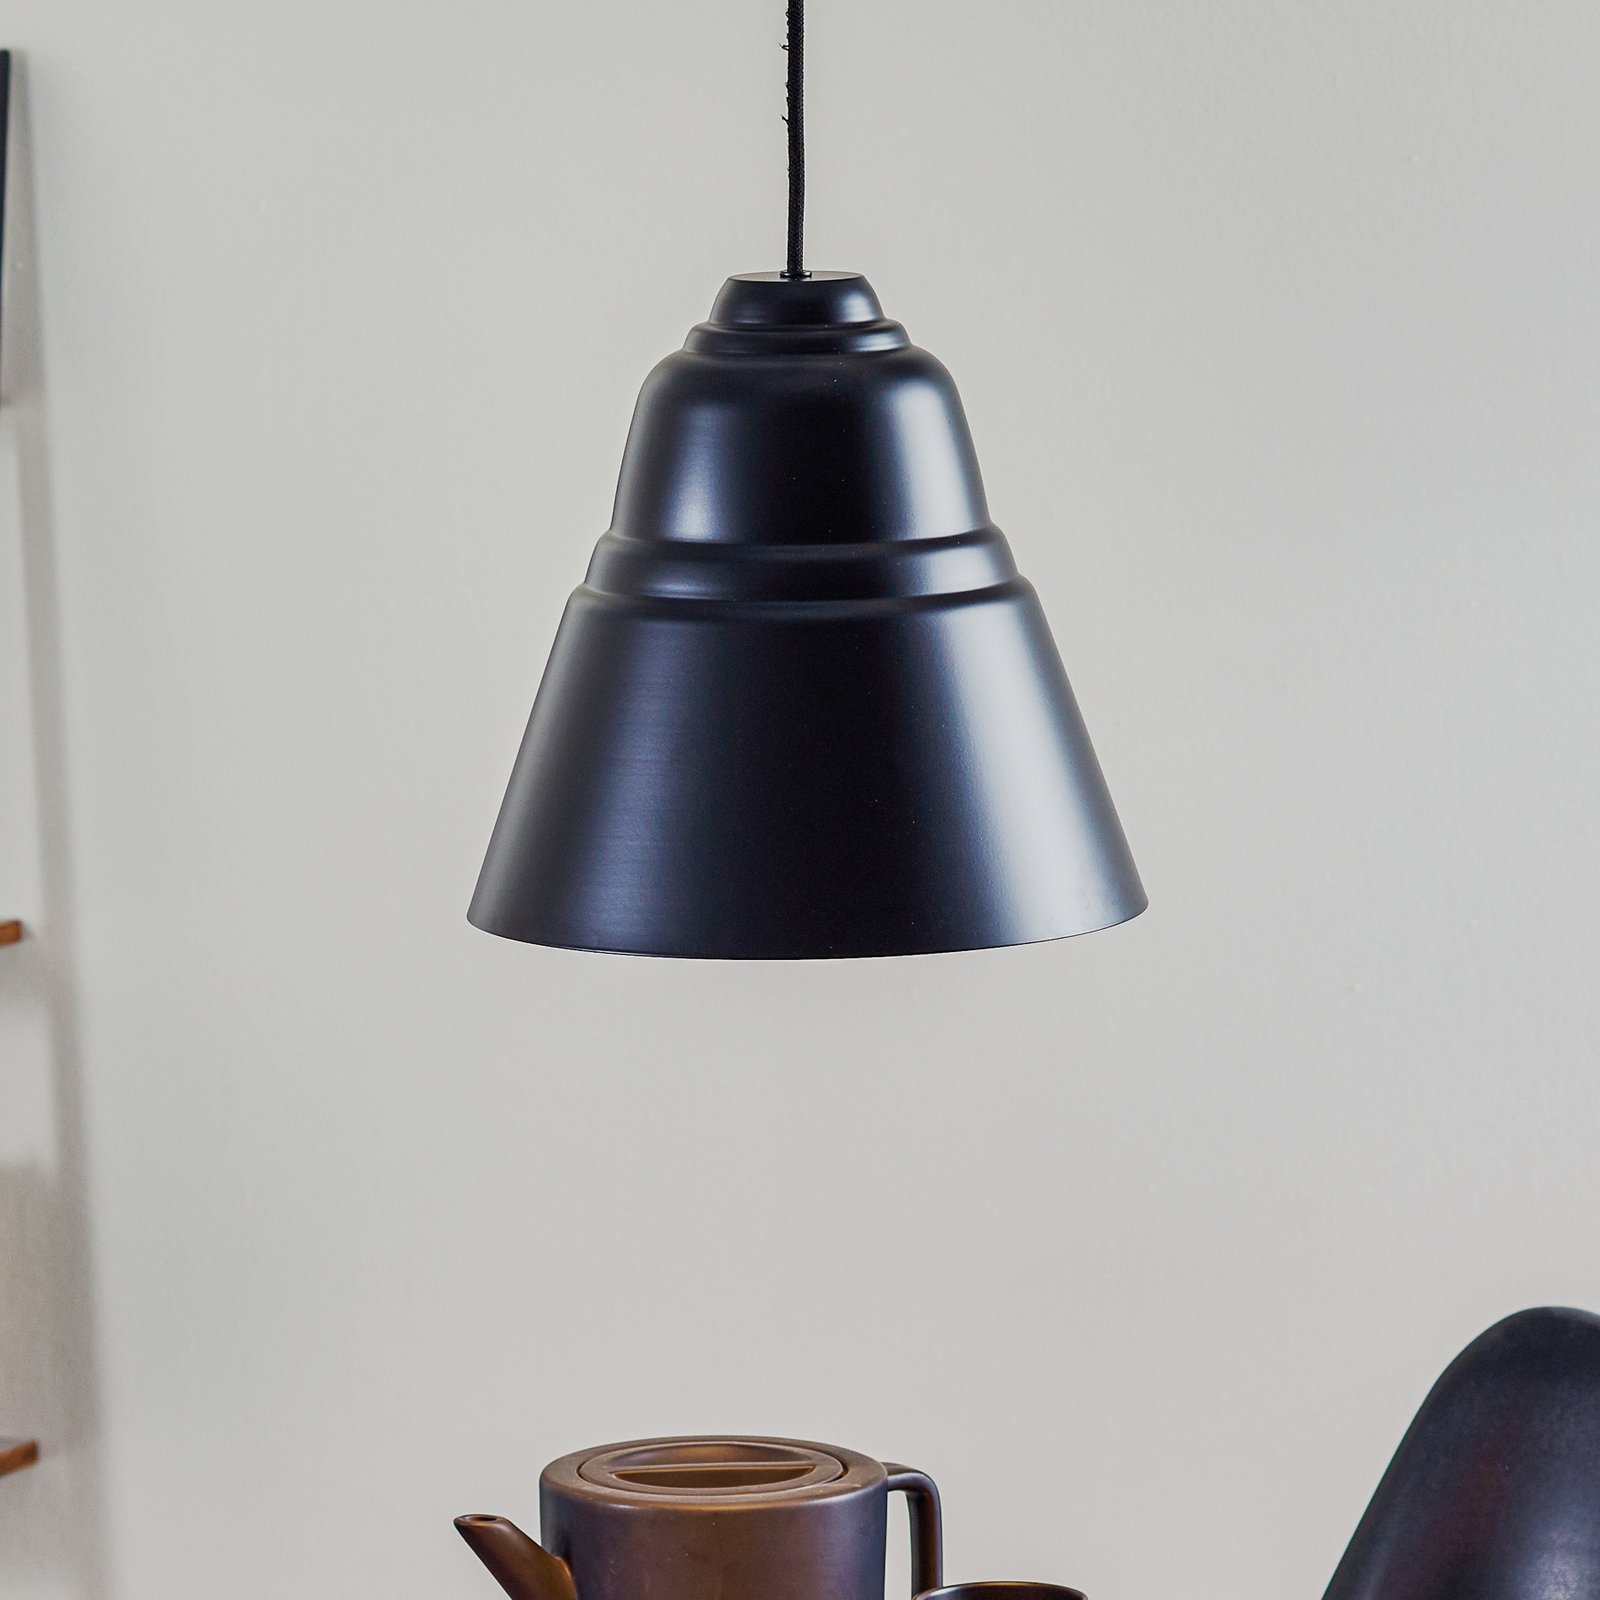 Relief hanging light with metal lampshade, black